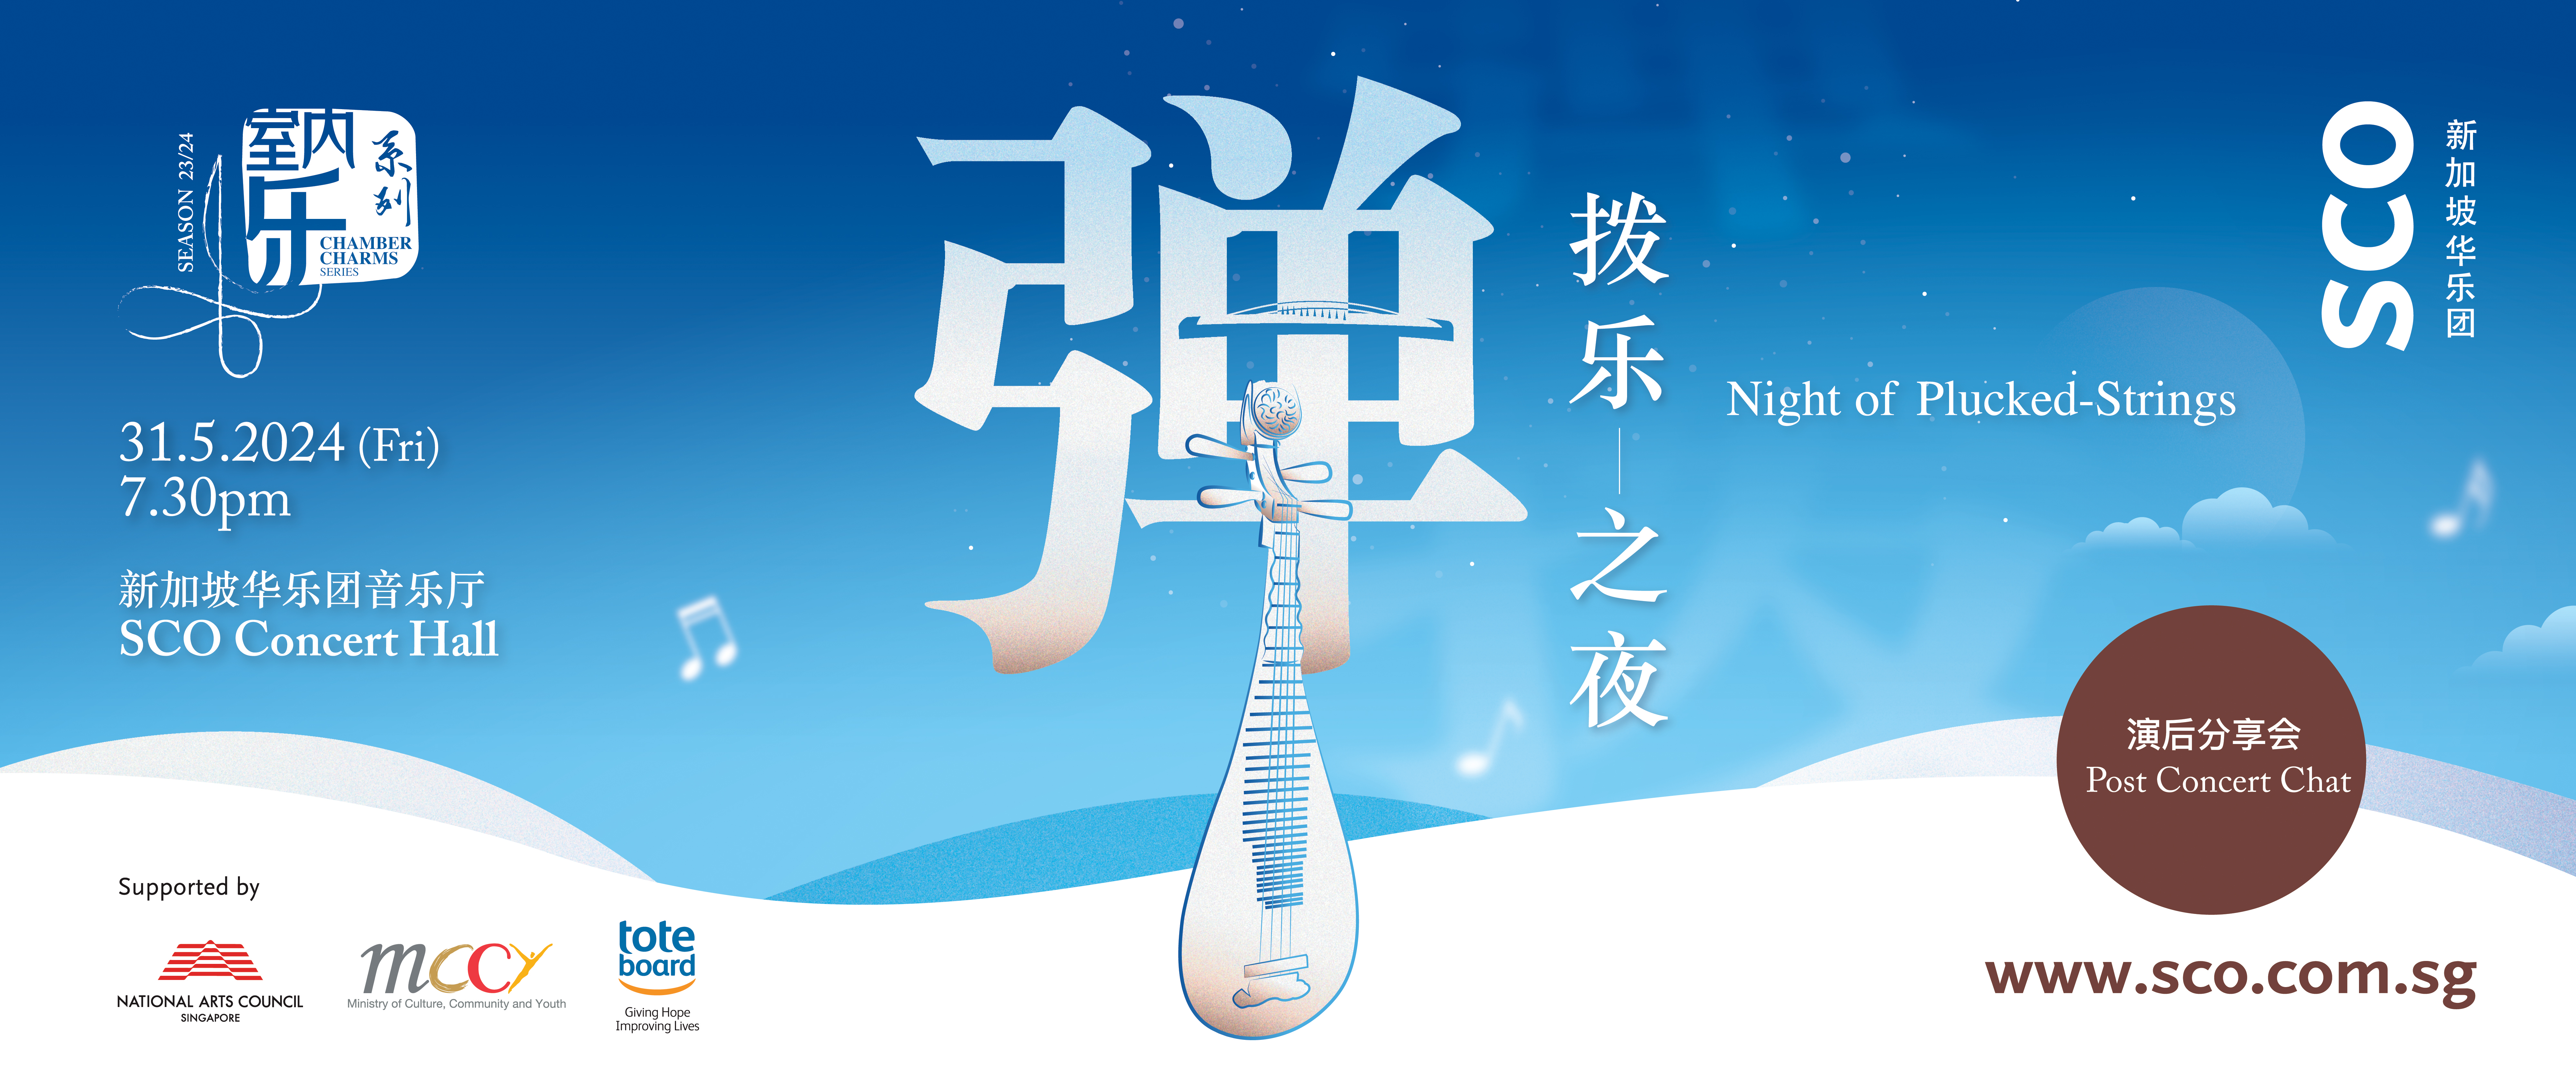 SCO Night of Plucked Strings 1920px x 800px